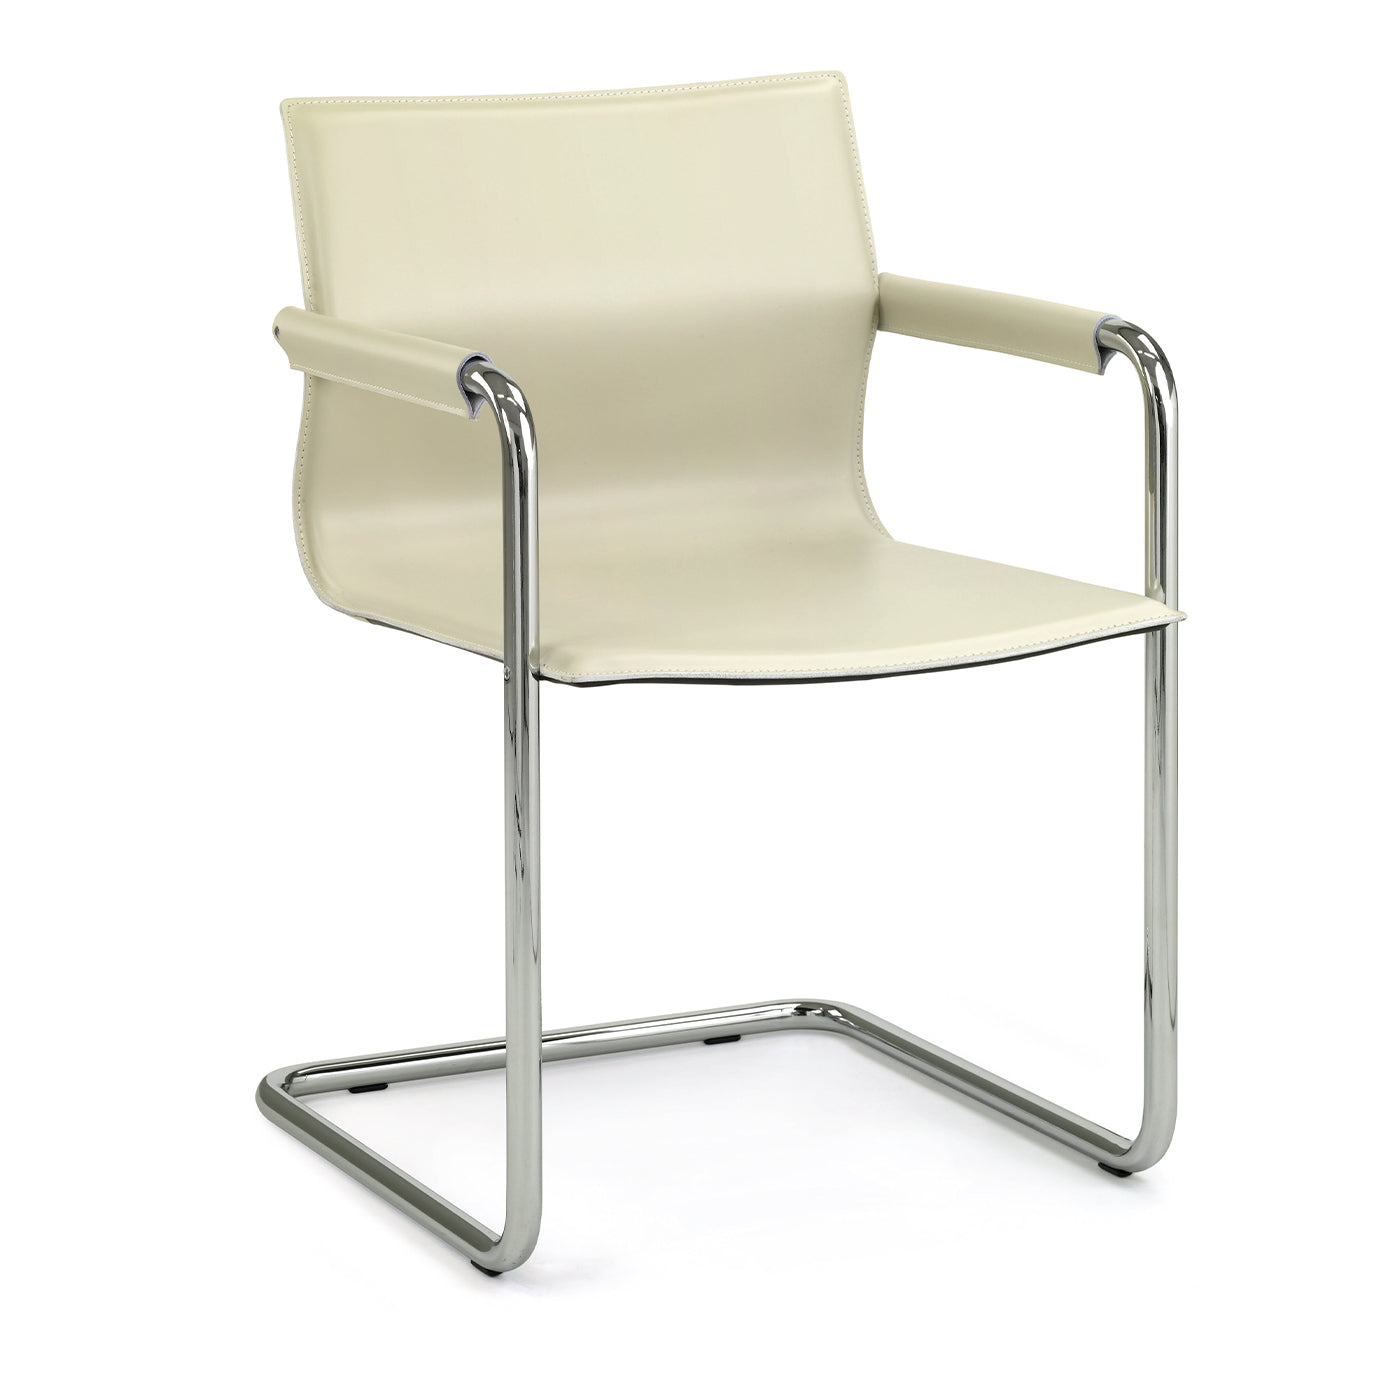  Lybra Chair With Covered Arms - Alternative view 1